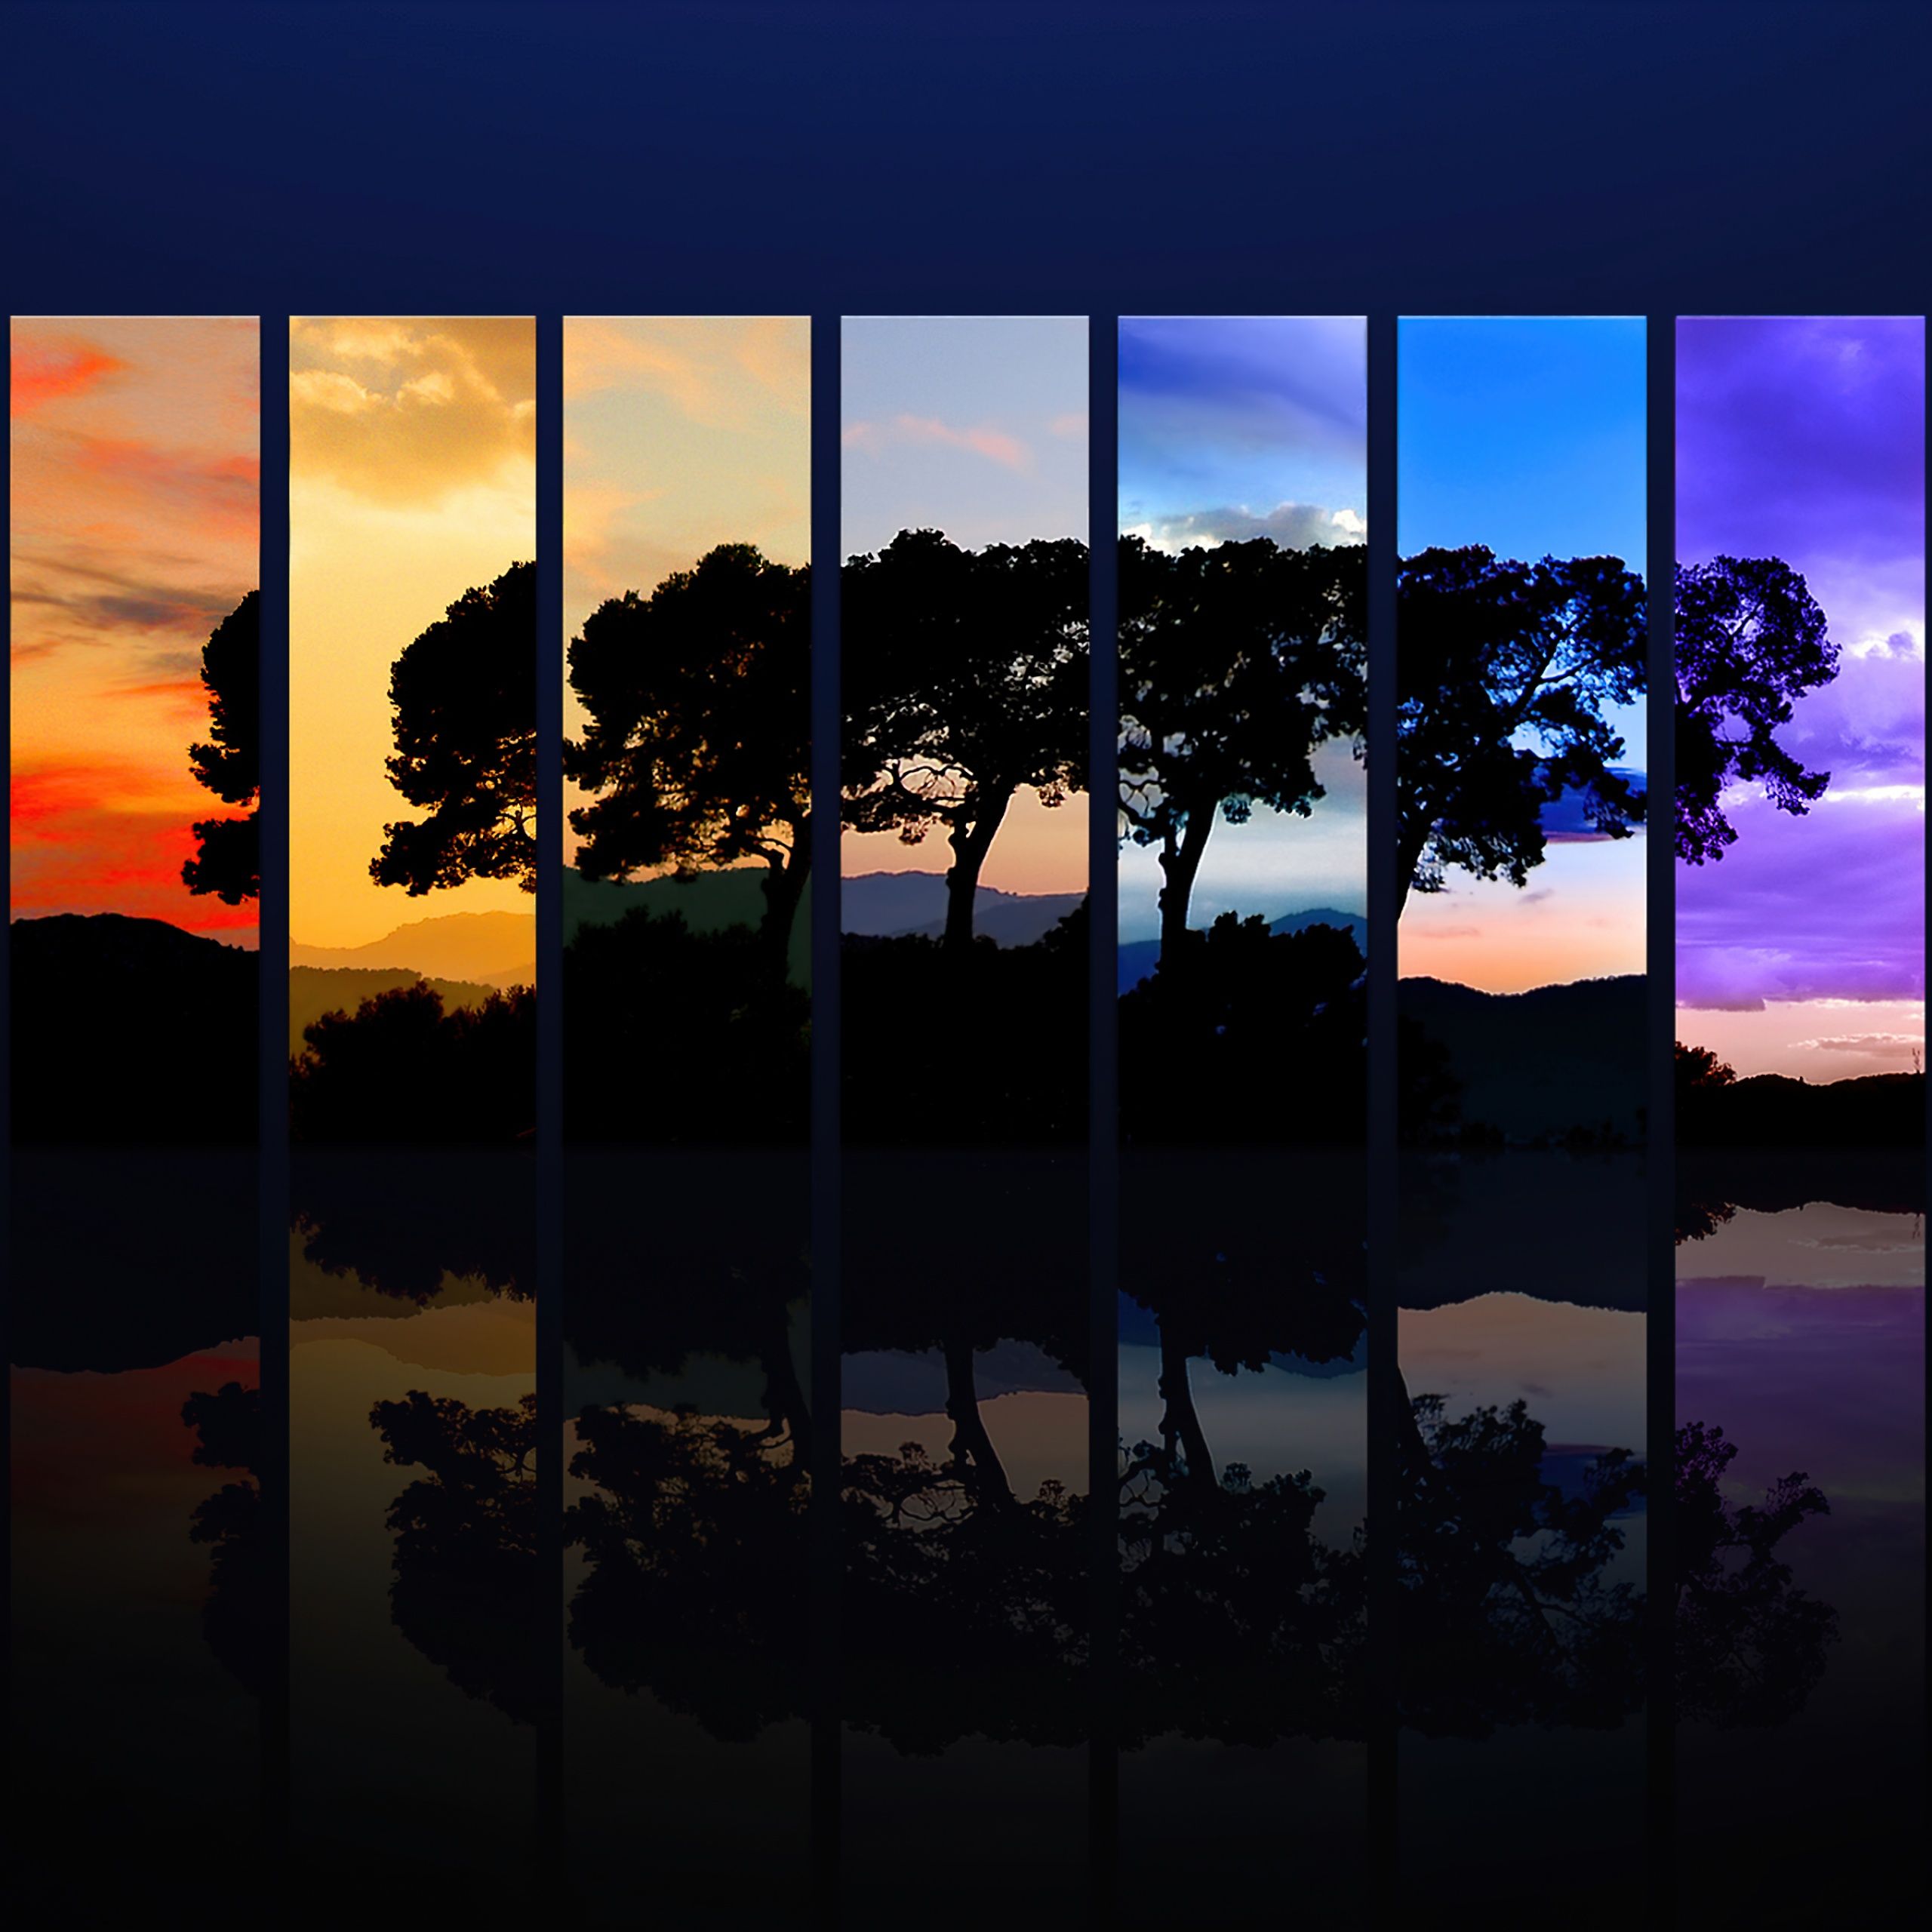 The image is a collage of a tree in front of a lake at different times of the day. - Sunrise